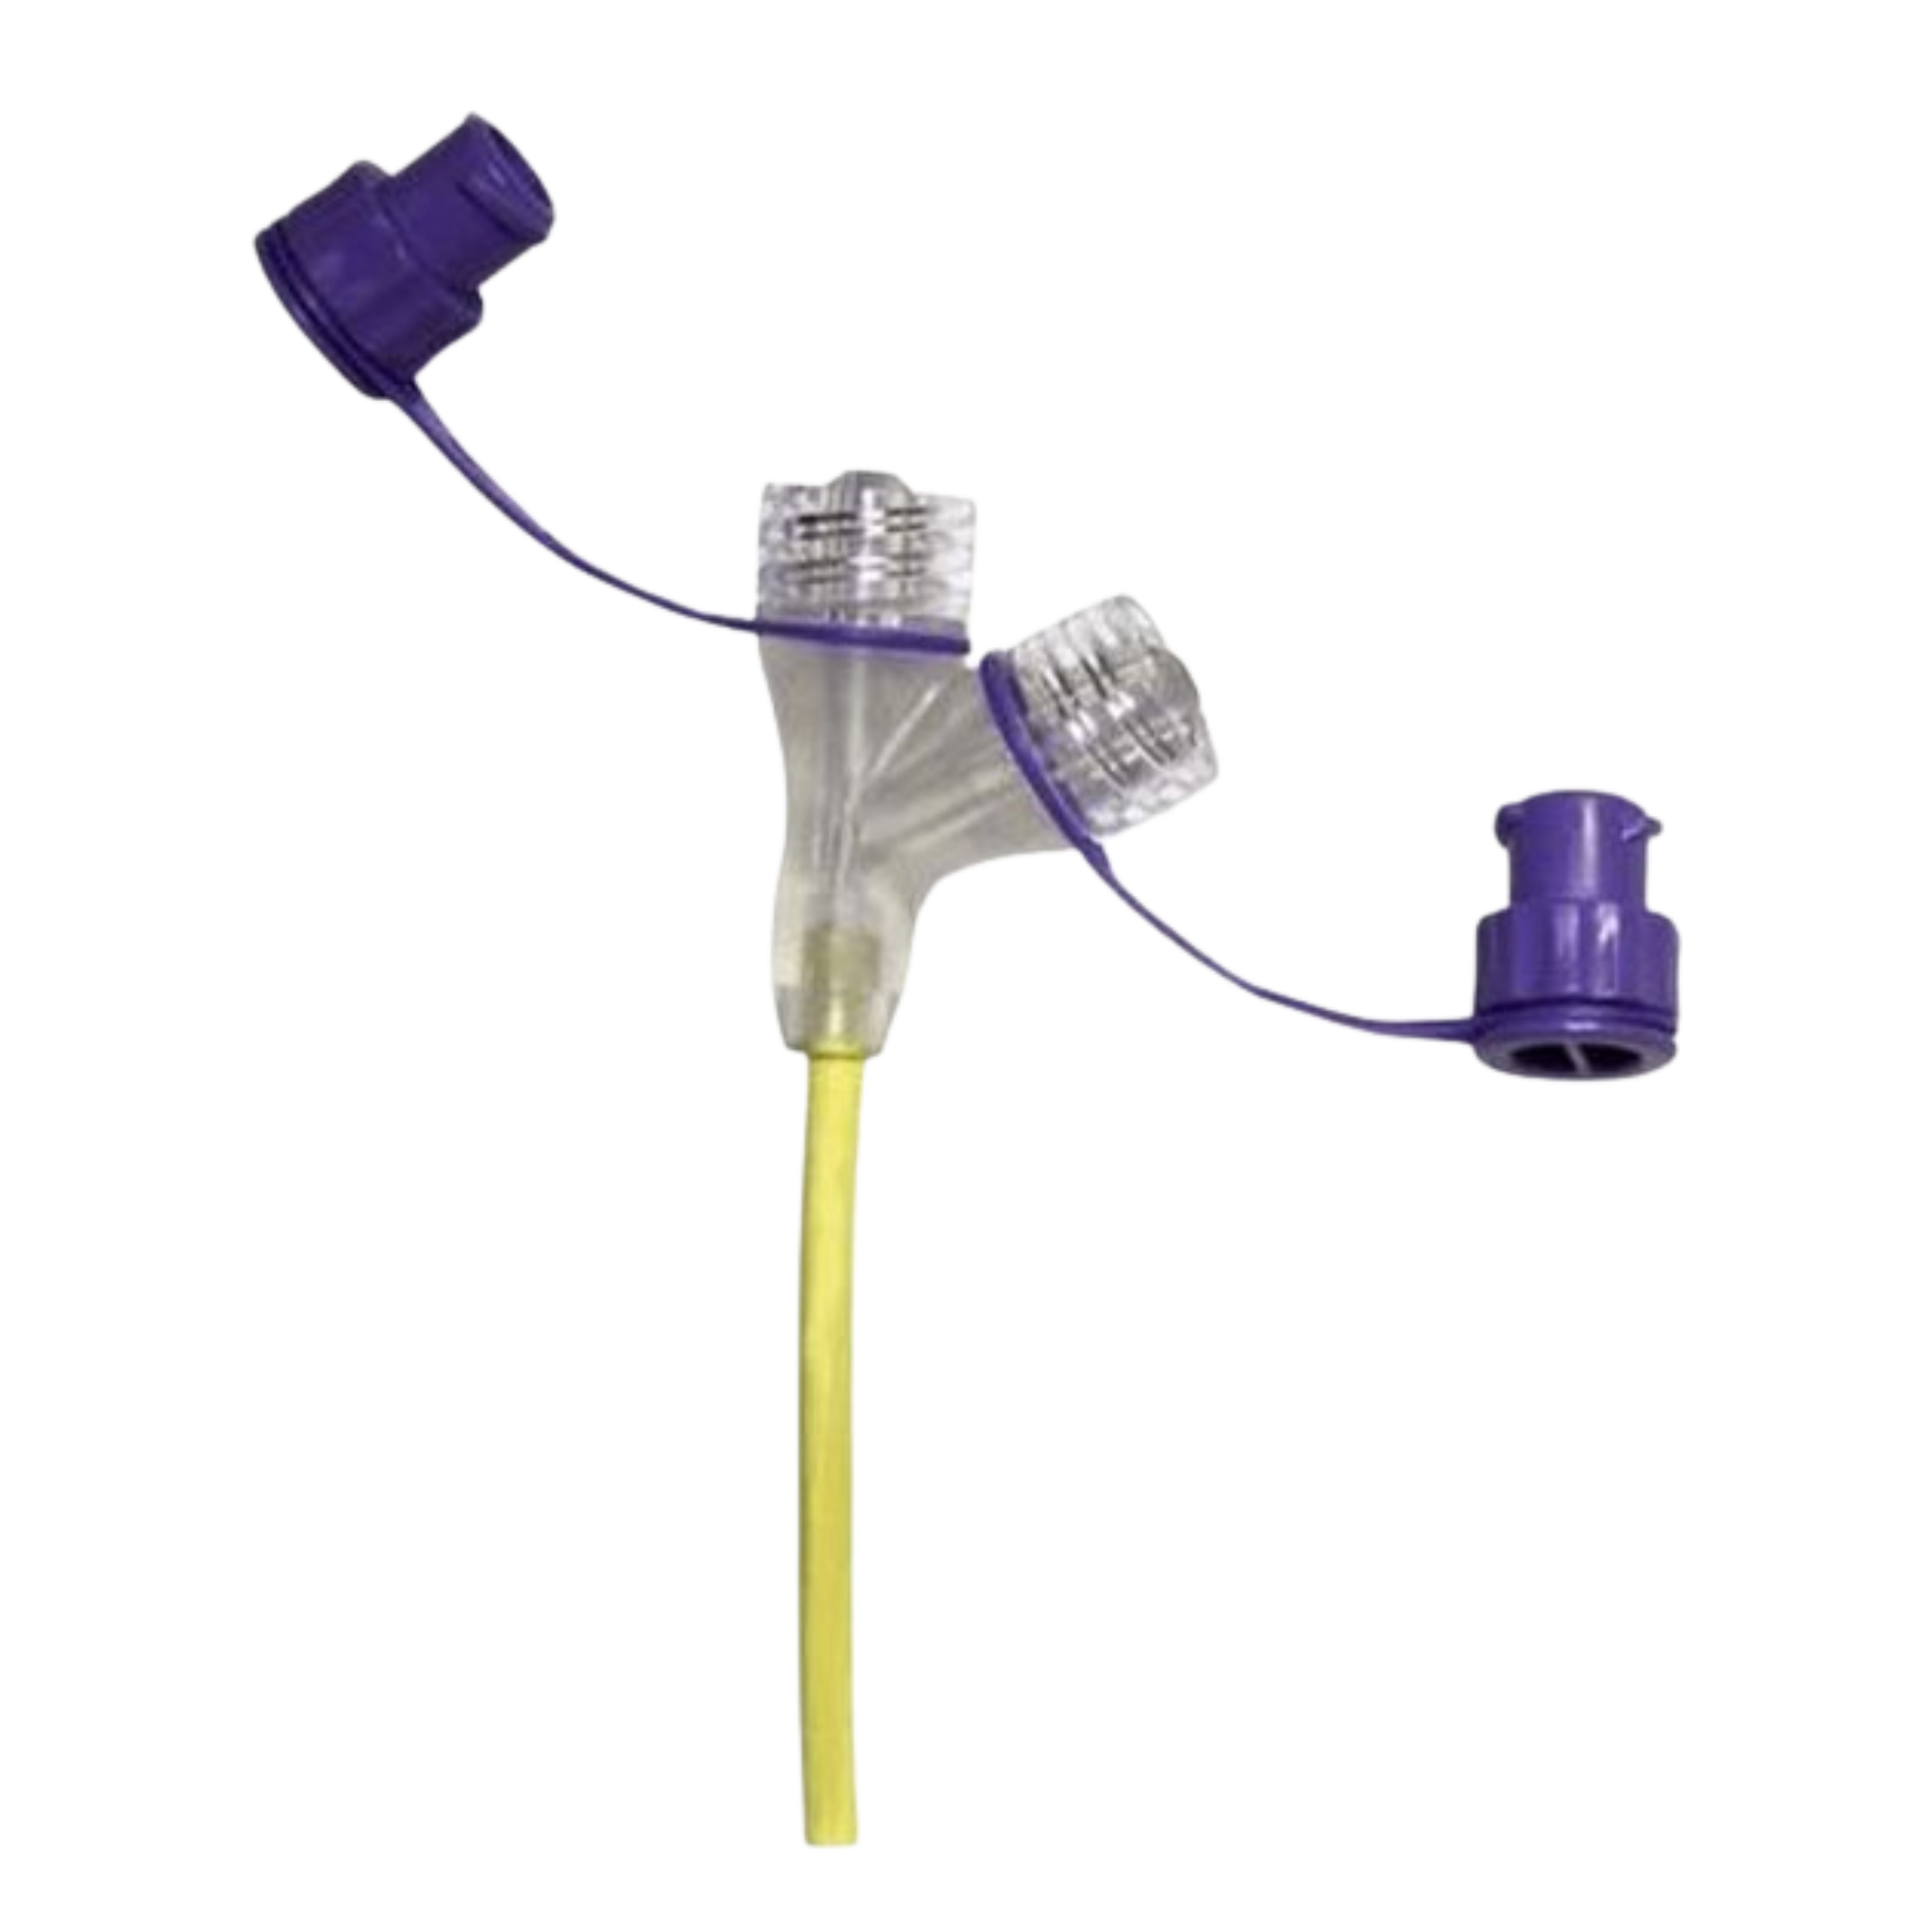 Avanos Corflo Extension set with ENFit Connectorss for NG/NI and Gastrostomy feeding tubes